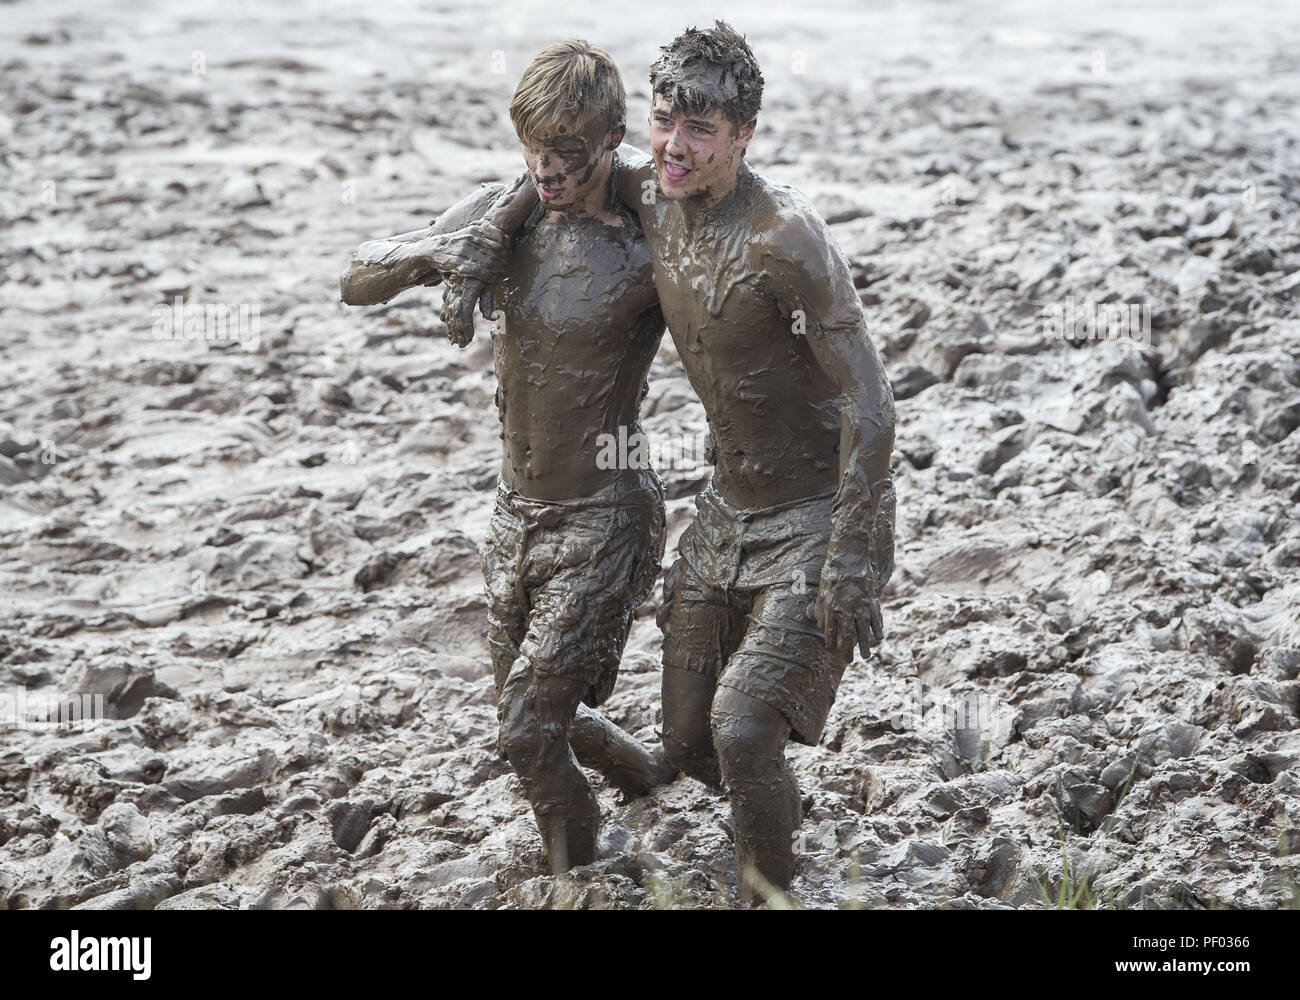 Wolfville, Nova Scotia, Canada. 17th Aug, 2018. Members of the Rugby Ontario (Canada) rugby team wallow in the mud at the Minas Basin between matches. The U16 team was in Wolfville for the Eastern Canadian Rugby Championships, which featured more than 35 teams from throughout Canada. Credit: PJ Heller/ZUMA Wire/Alamy Live News Stock Photo